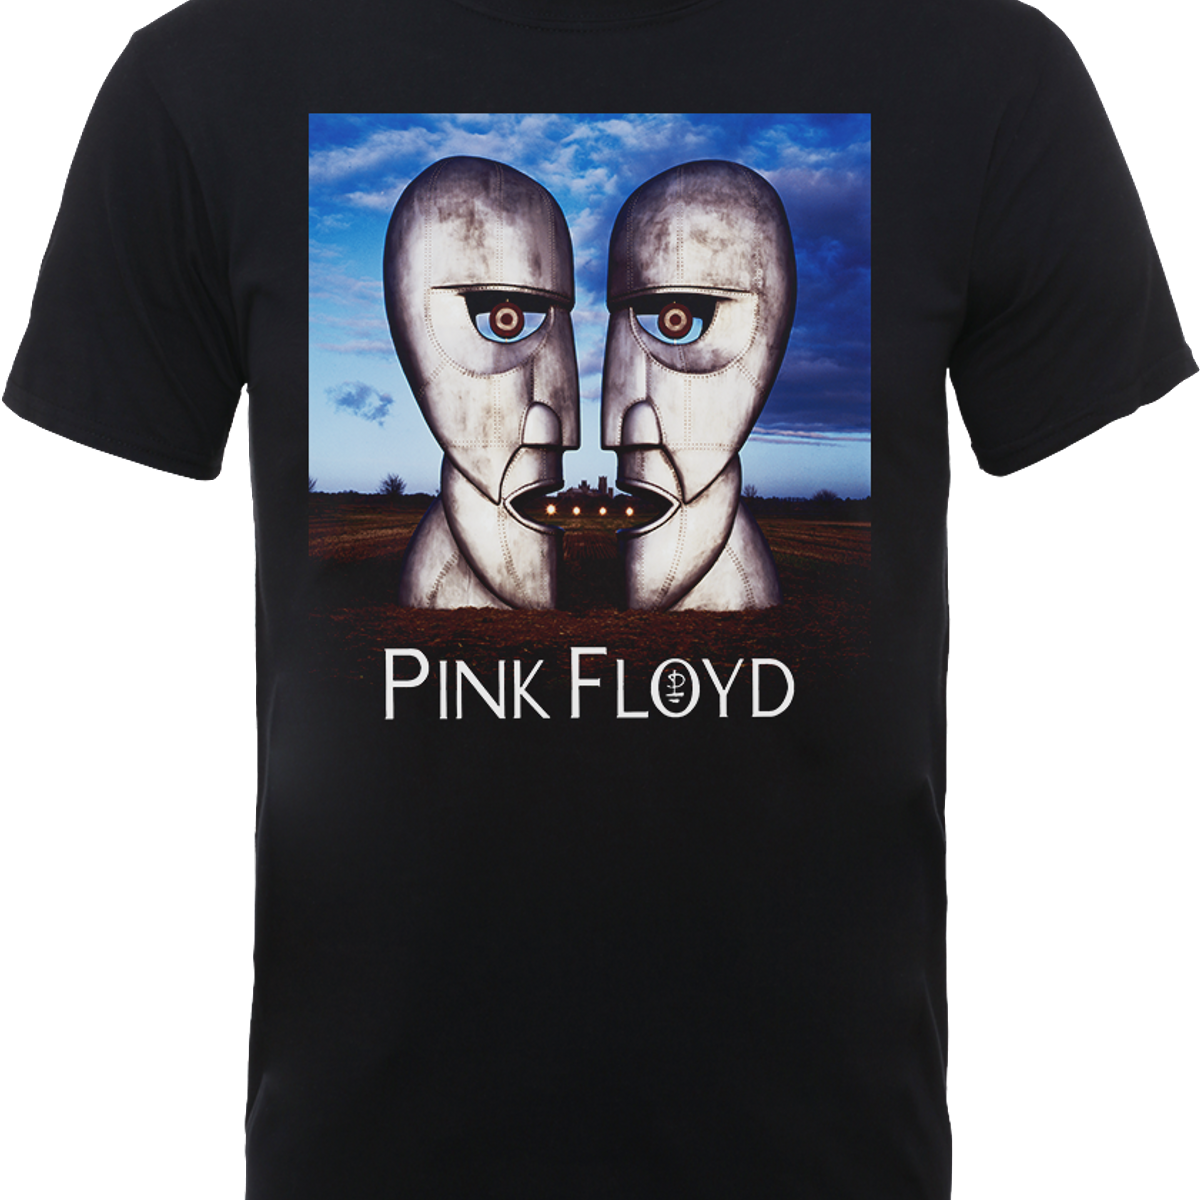 5/6 7 Pink Floyd THE DIVISION BELL Tour '91 Vintage Style T-Shirt KIDS Sizes 4 